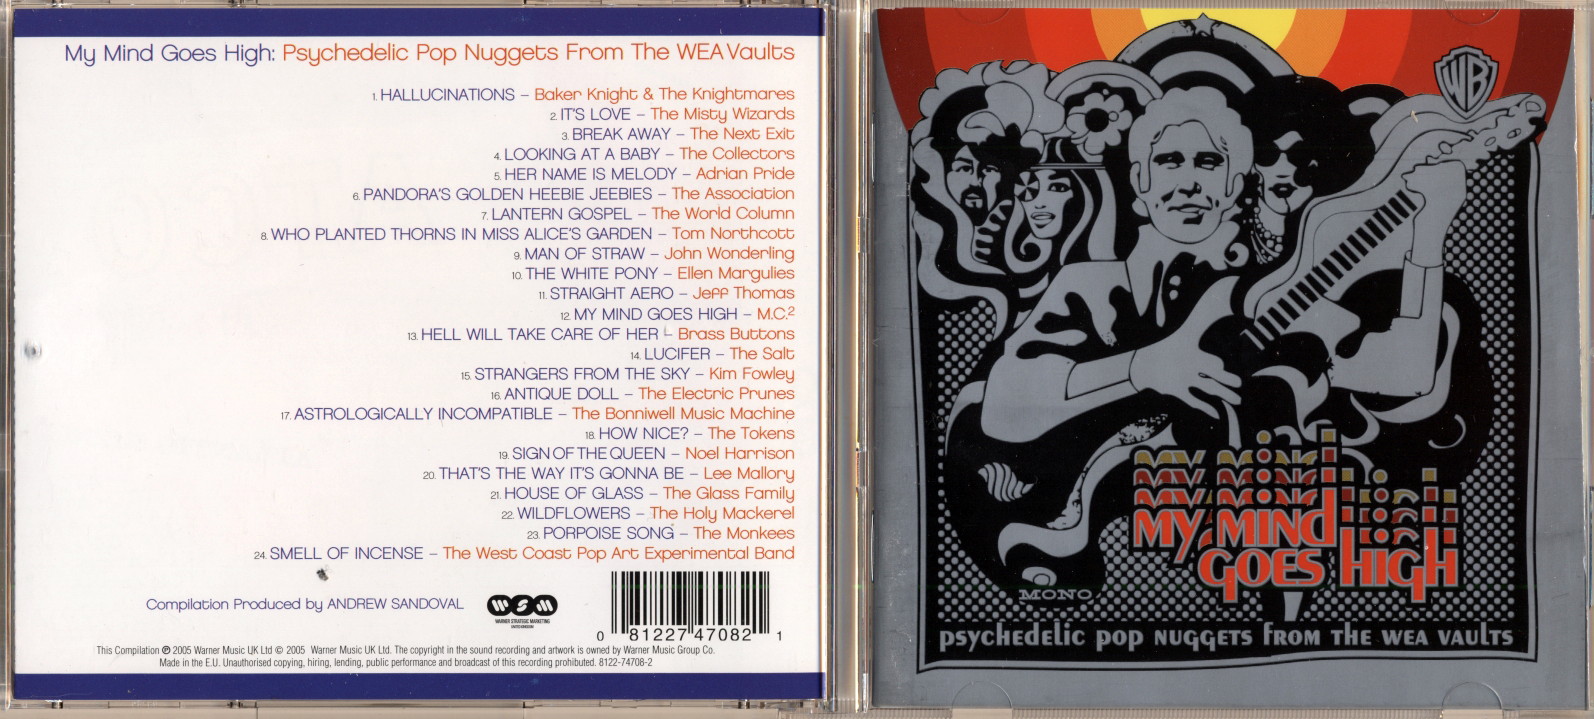 Hallucinations: Psychedelic Pop Nuggets From The WEA Vaults